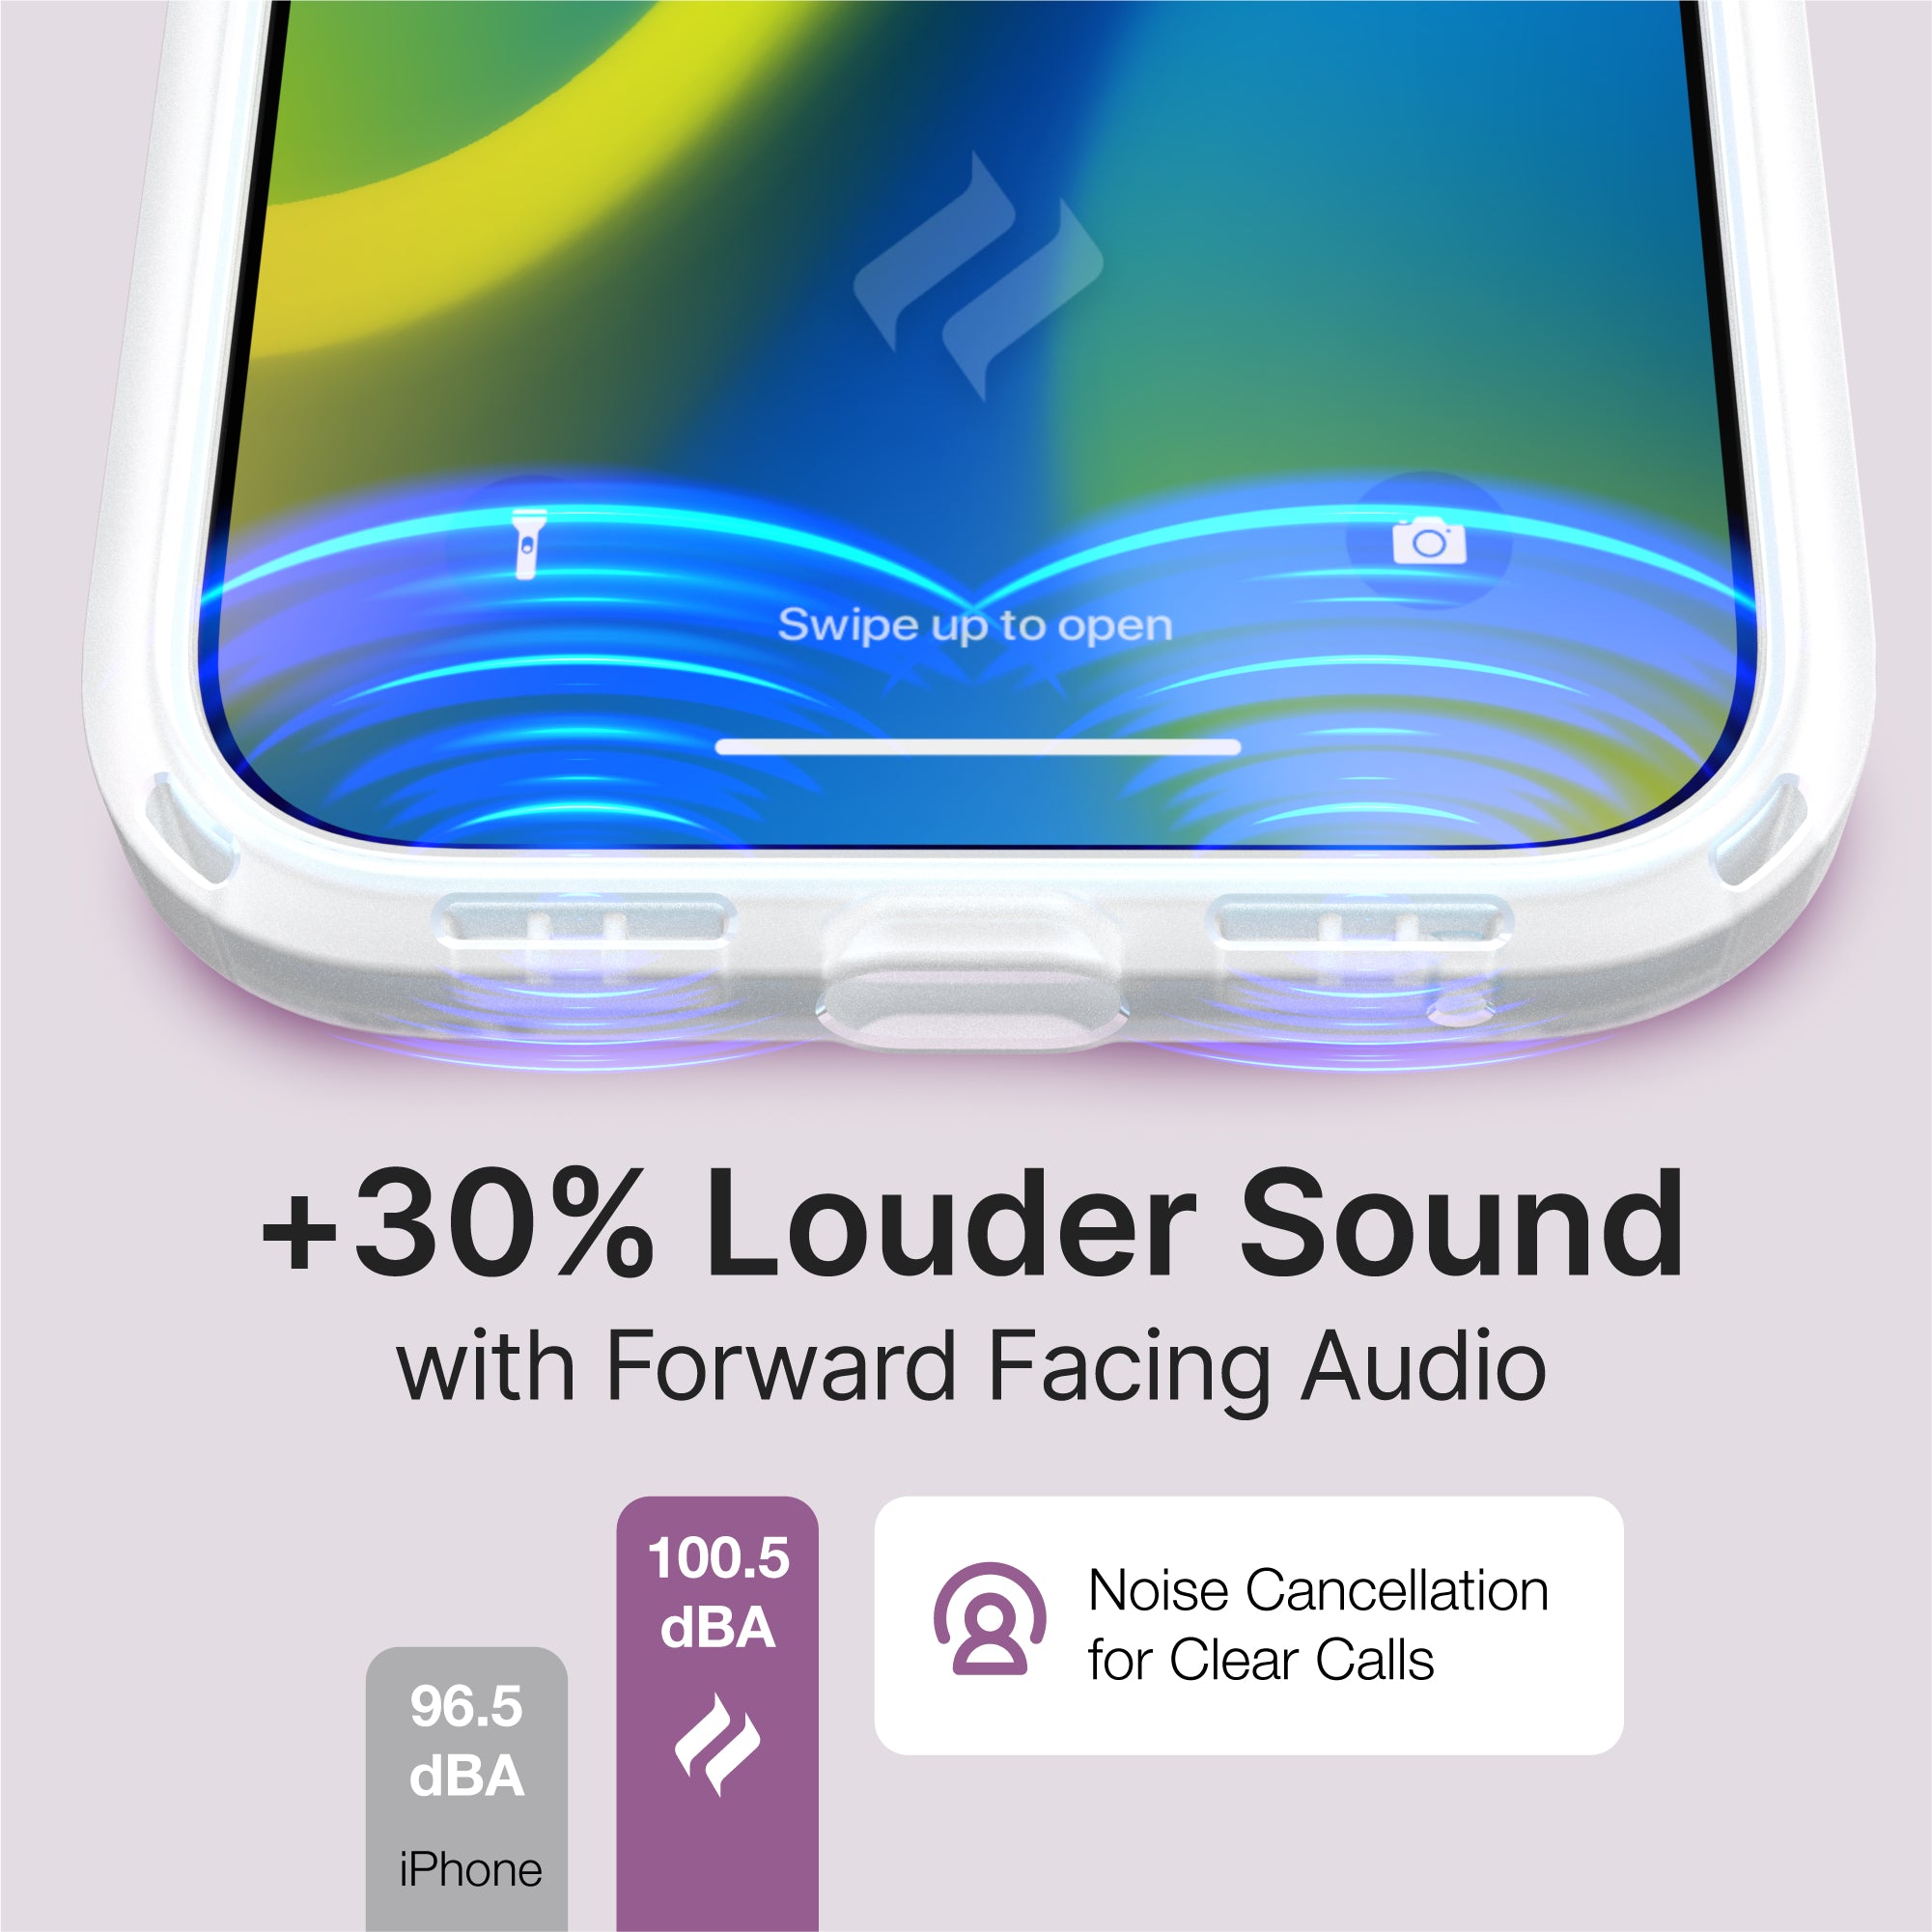 Catalyst iphone 15 series influence case iphone 15 pro in clear colorway showing the forward facing audio of the case text reads +30% louder sound with forward facing audio 96.5 dBA iphone 100.5 dBA noise cancellation for clear calls